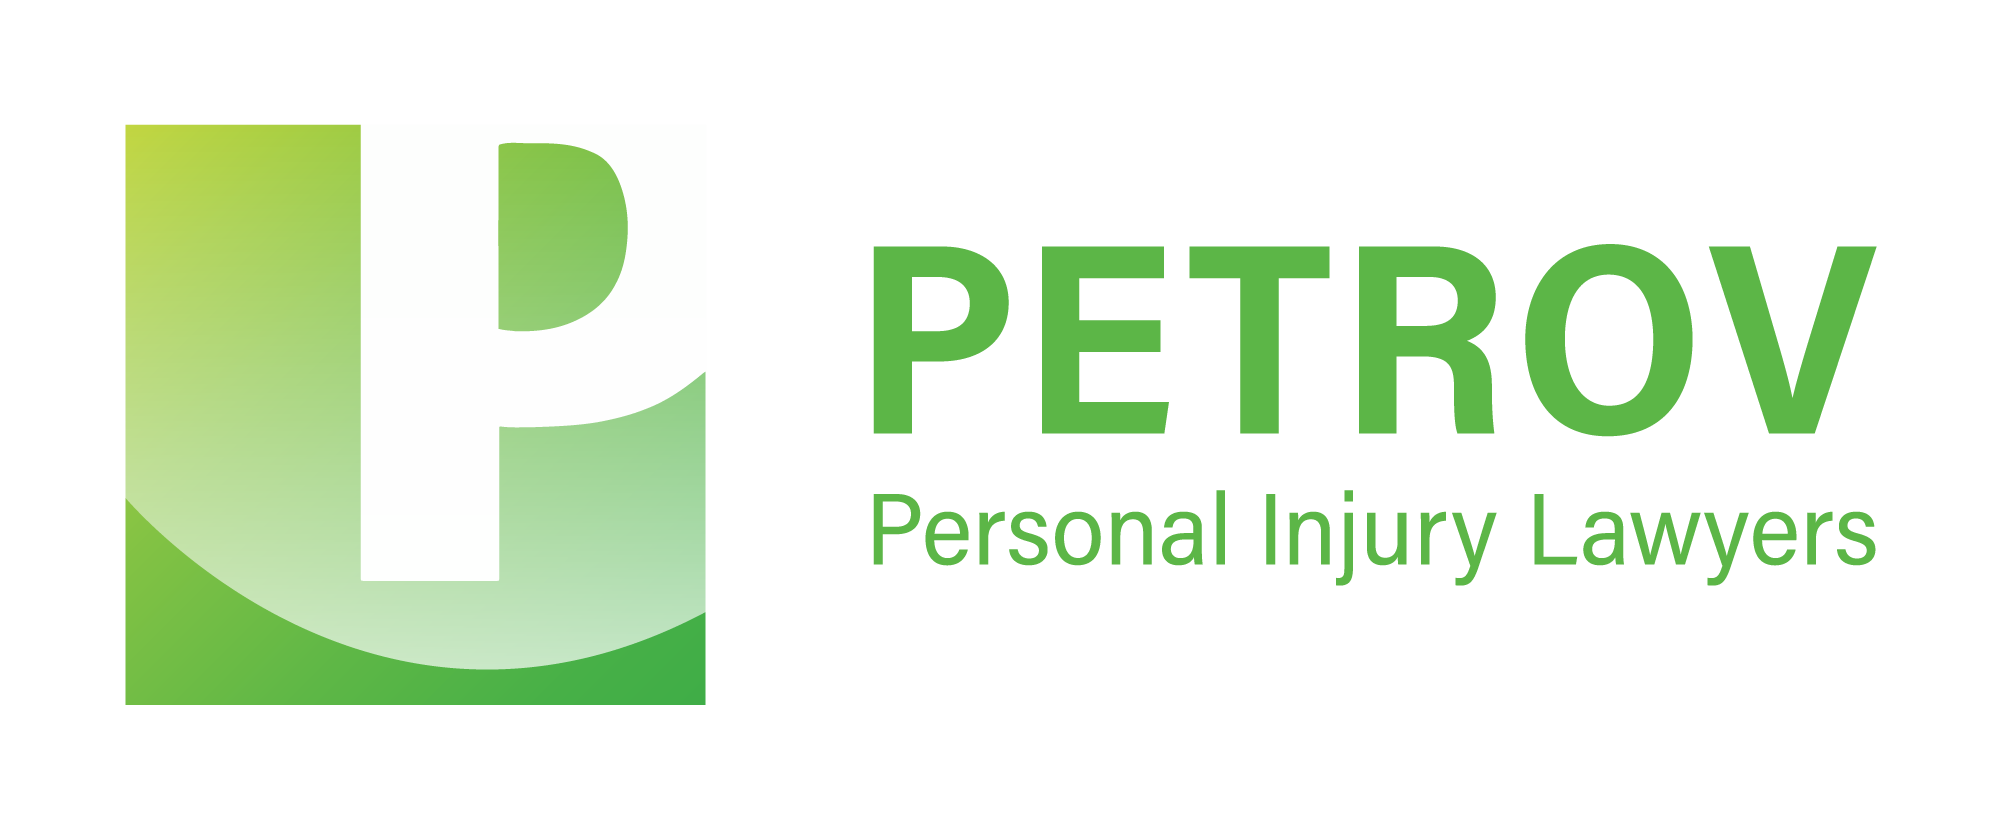 Petrov Personal Injury Lawyers Profile Picture